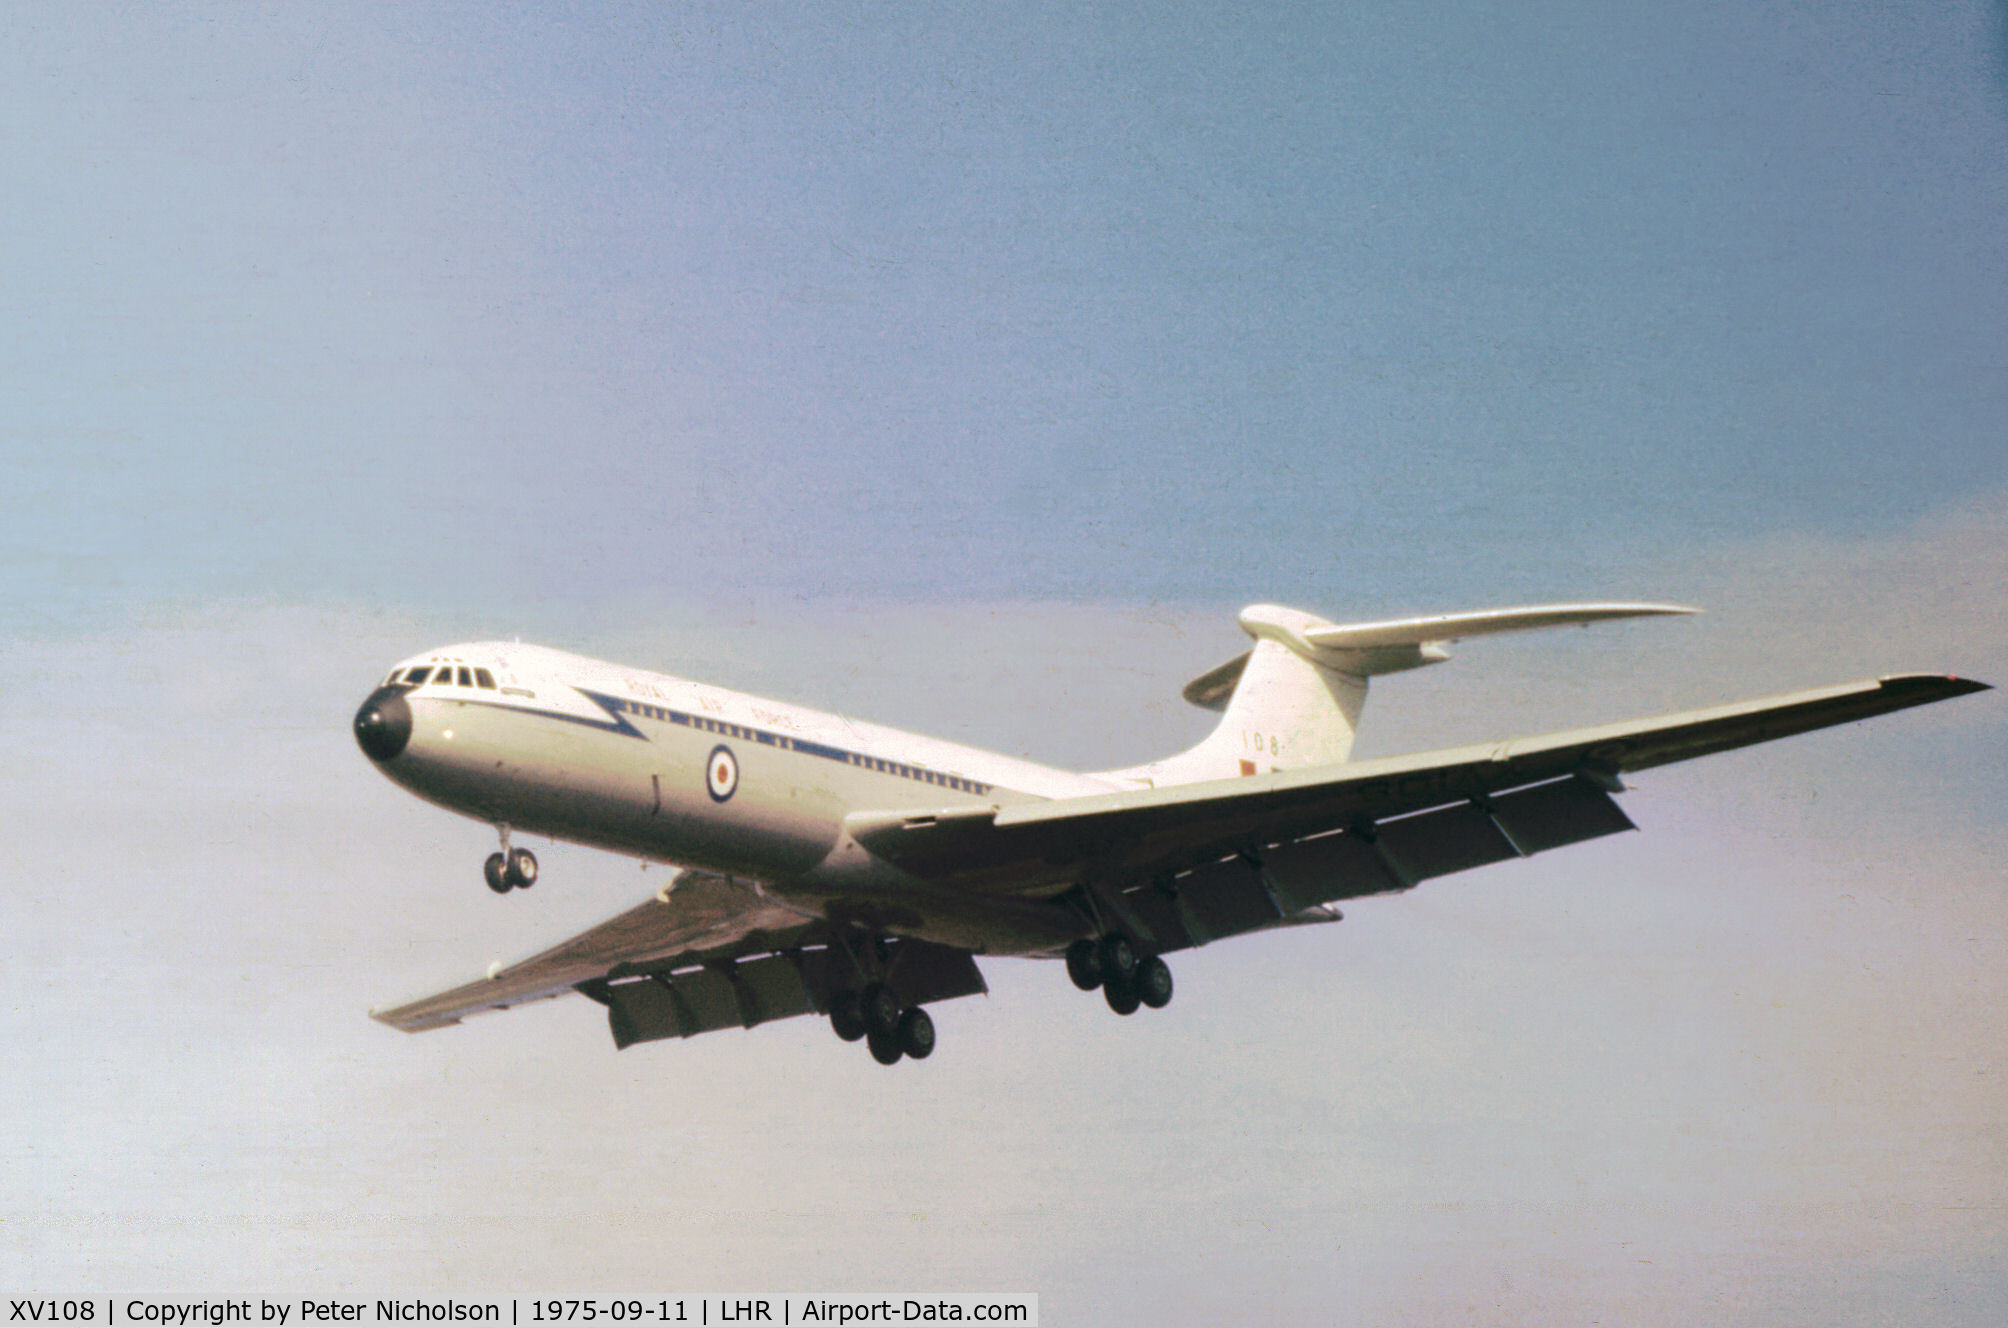 XV108, 1968 Vickers VC10 C.1K C/N 838, VC-10 C.1K of 10 Squadron at RAF Brize Norton on final approach to Heathrow in September 1975.